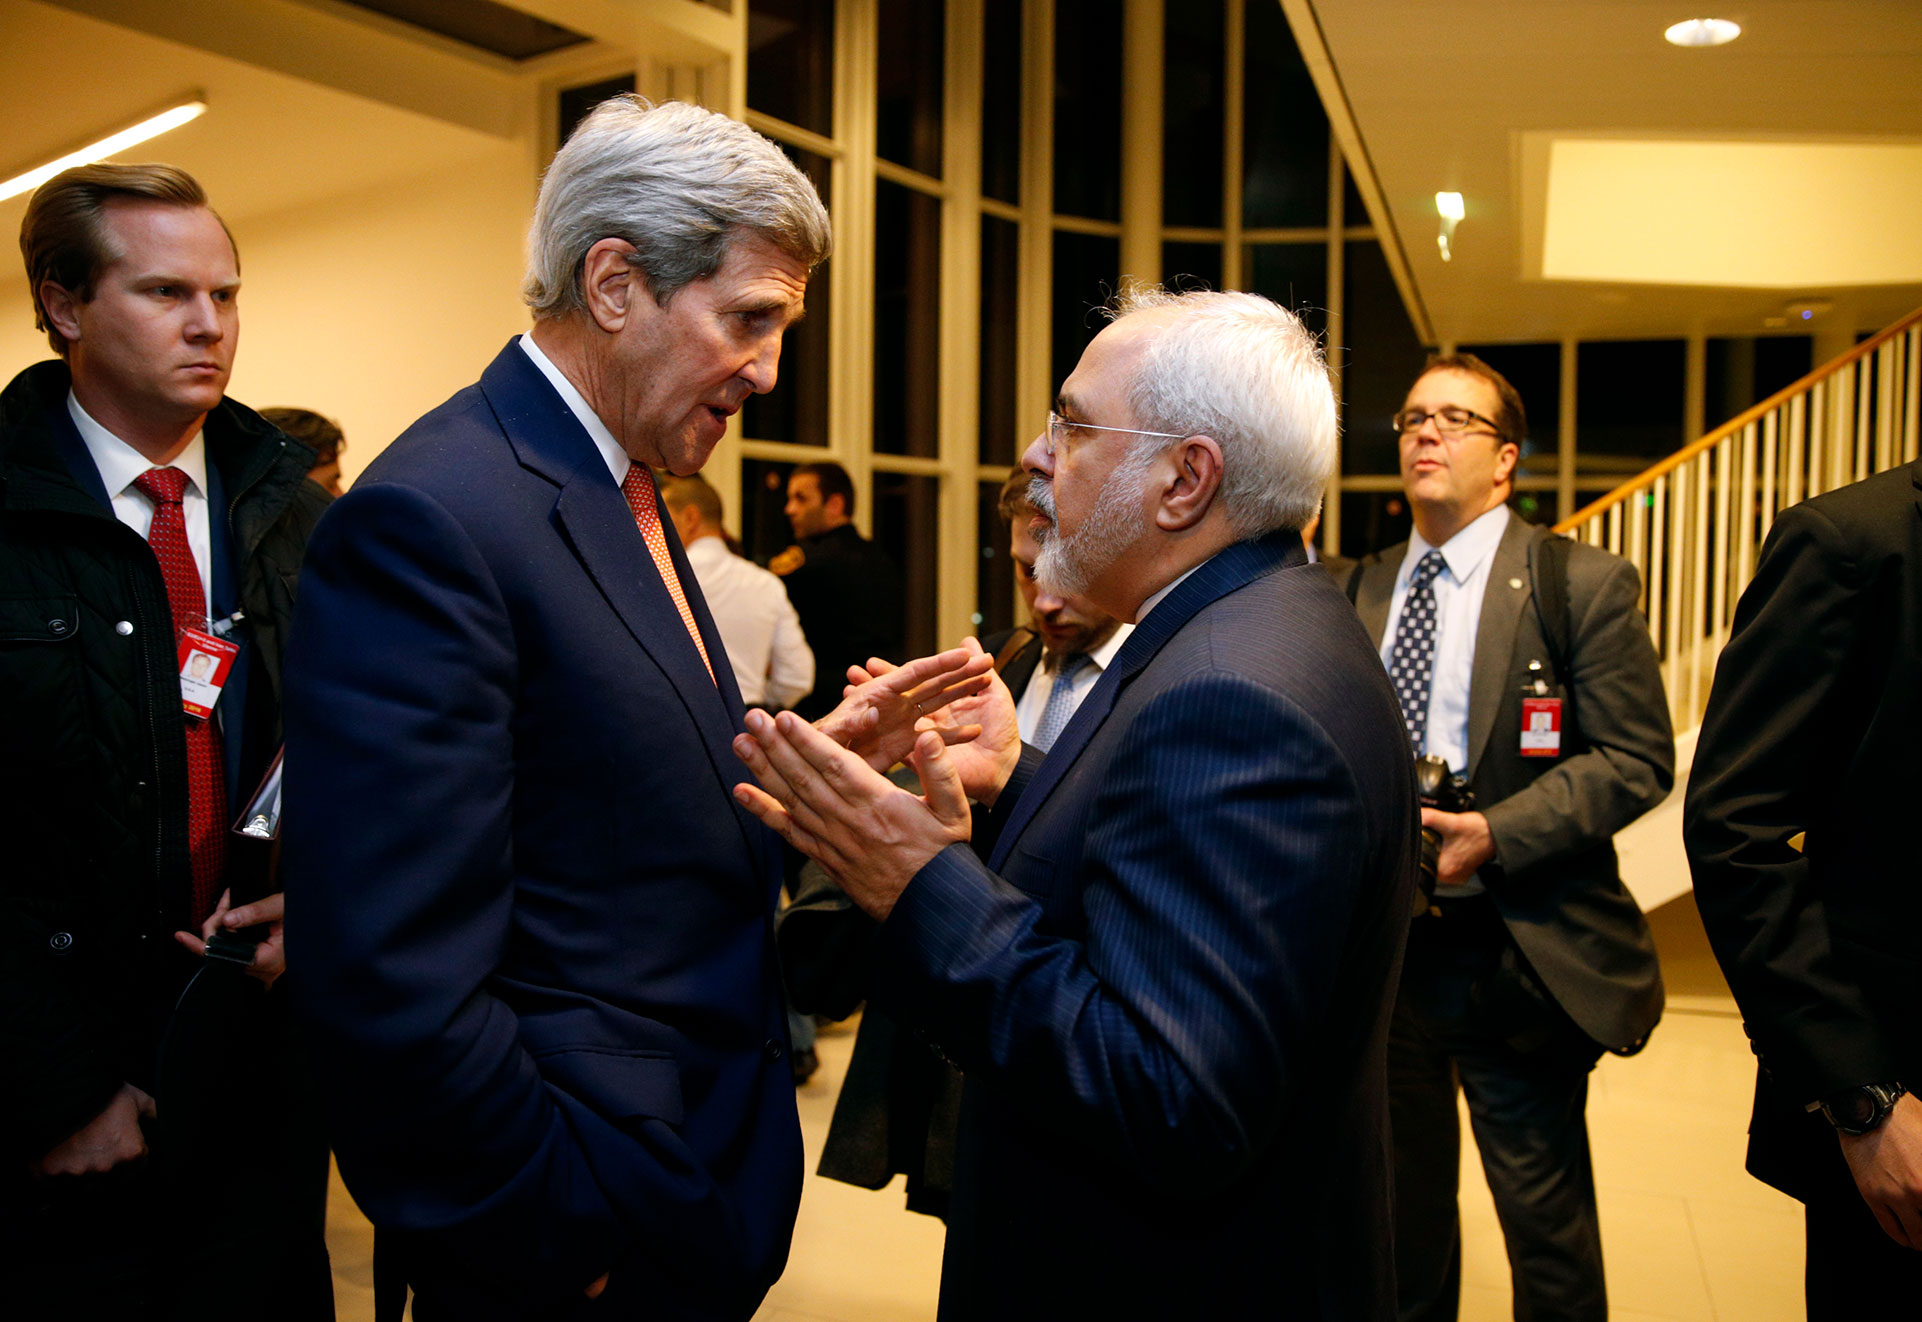 In this Jan. 16, 2016 file-pool photo, Secretary of State John Kerry talks with Iranian Foreign Minister Mohammad Javad Zarif in Vienna, after the International Atomic Energy Agency (IAEA) verified that Iran has met all conditions under the nuclear deal. The Iran nuclear accord is fragile at its one-year anniversary. (Kevin Lamarque/Pool via AP, File)